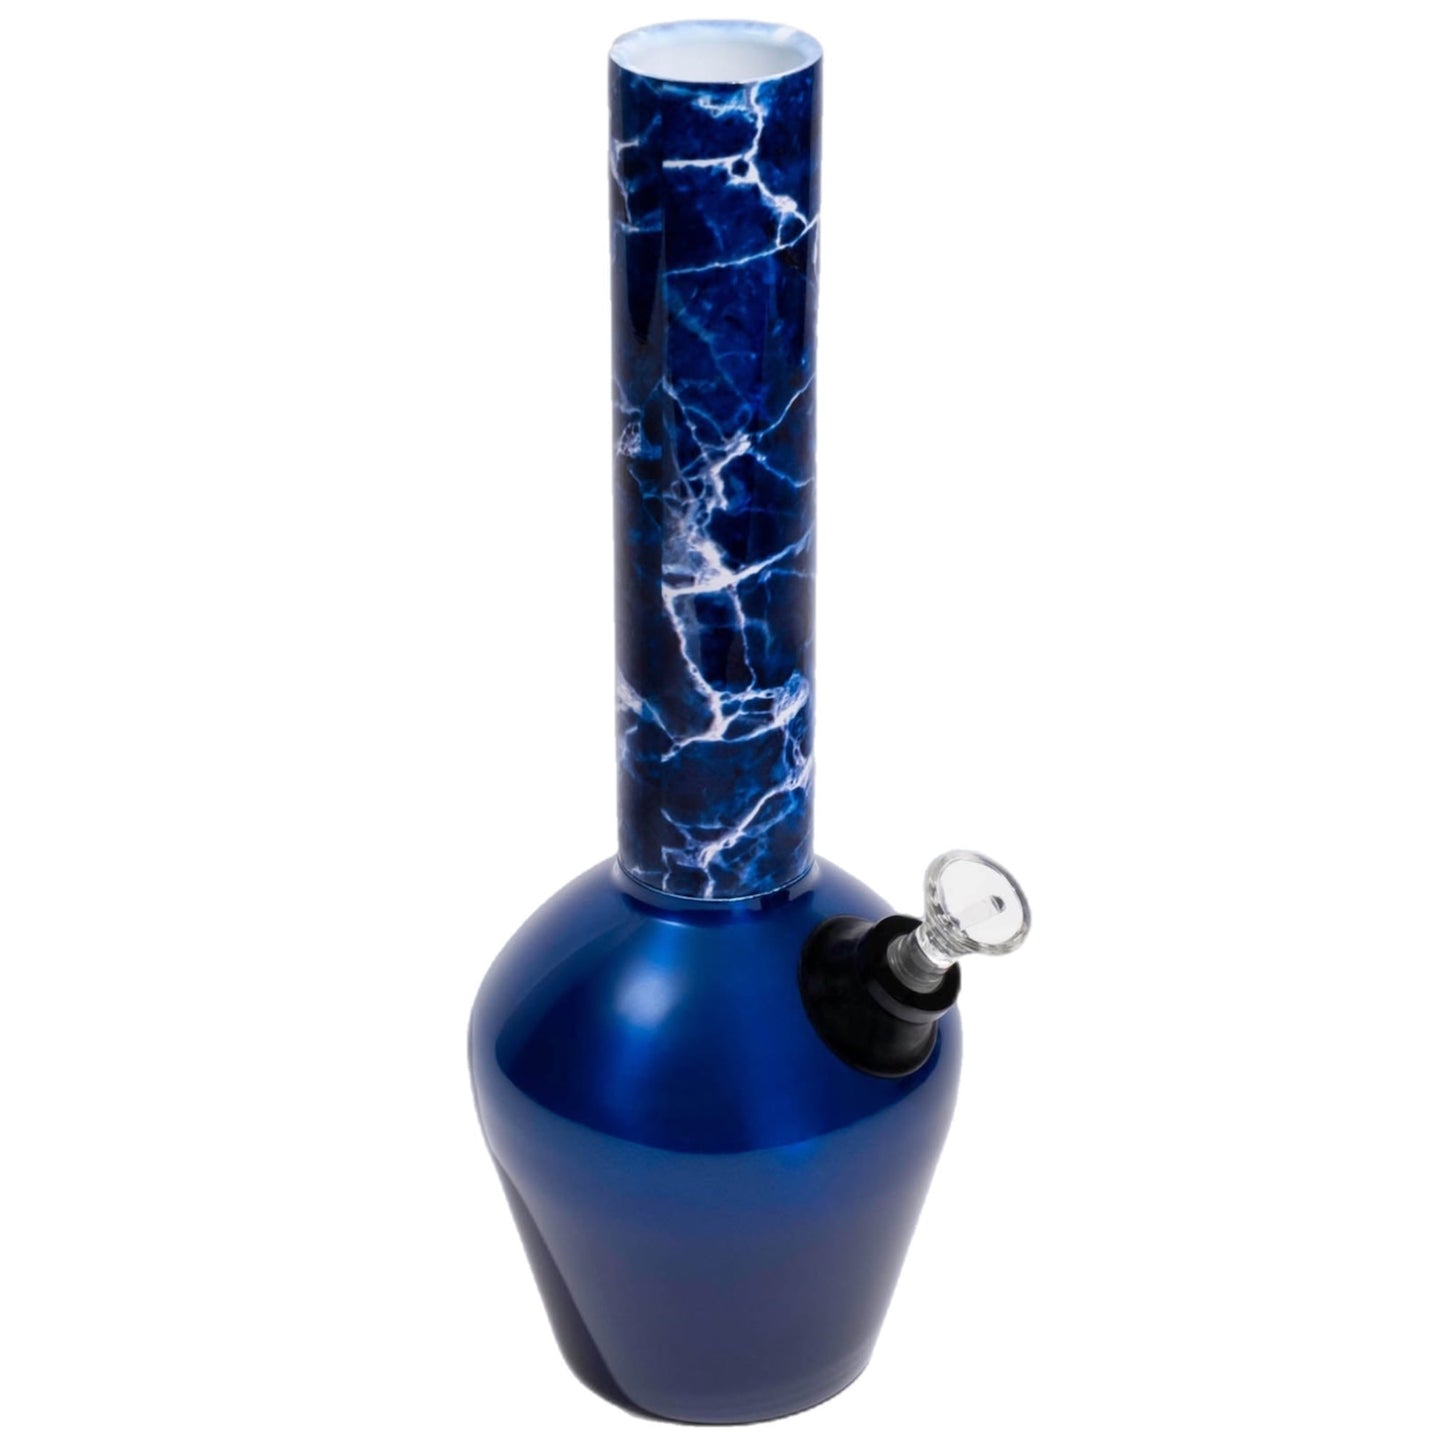 Chill Steel Pipes Mix & Match Series Base by Chill Steel Pipes | Mission Dispensary